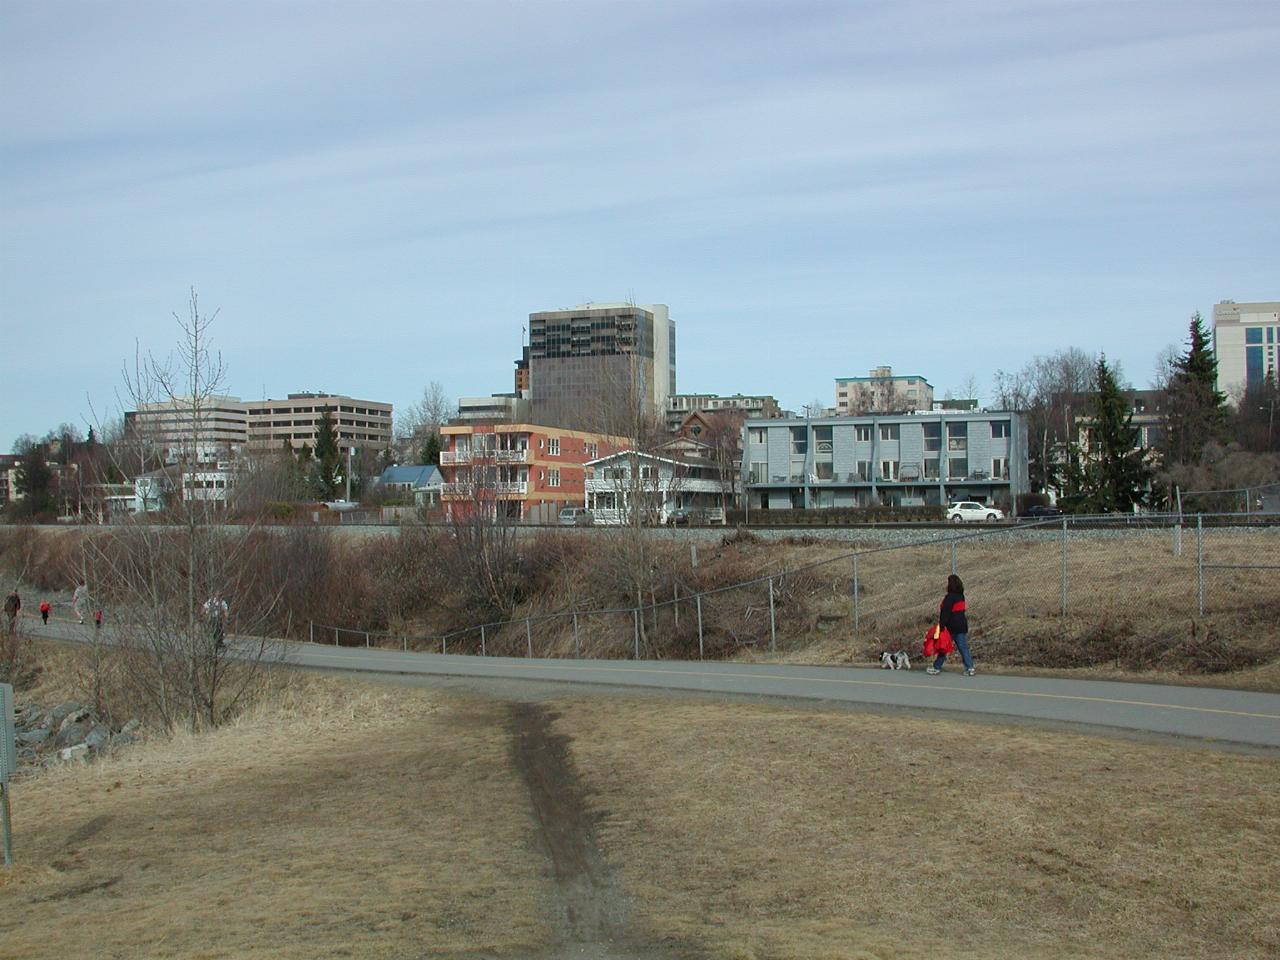 Western end of Anchorage, as seen from the walking trail